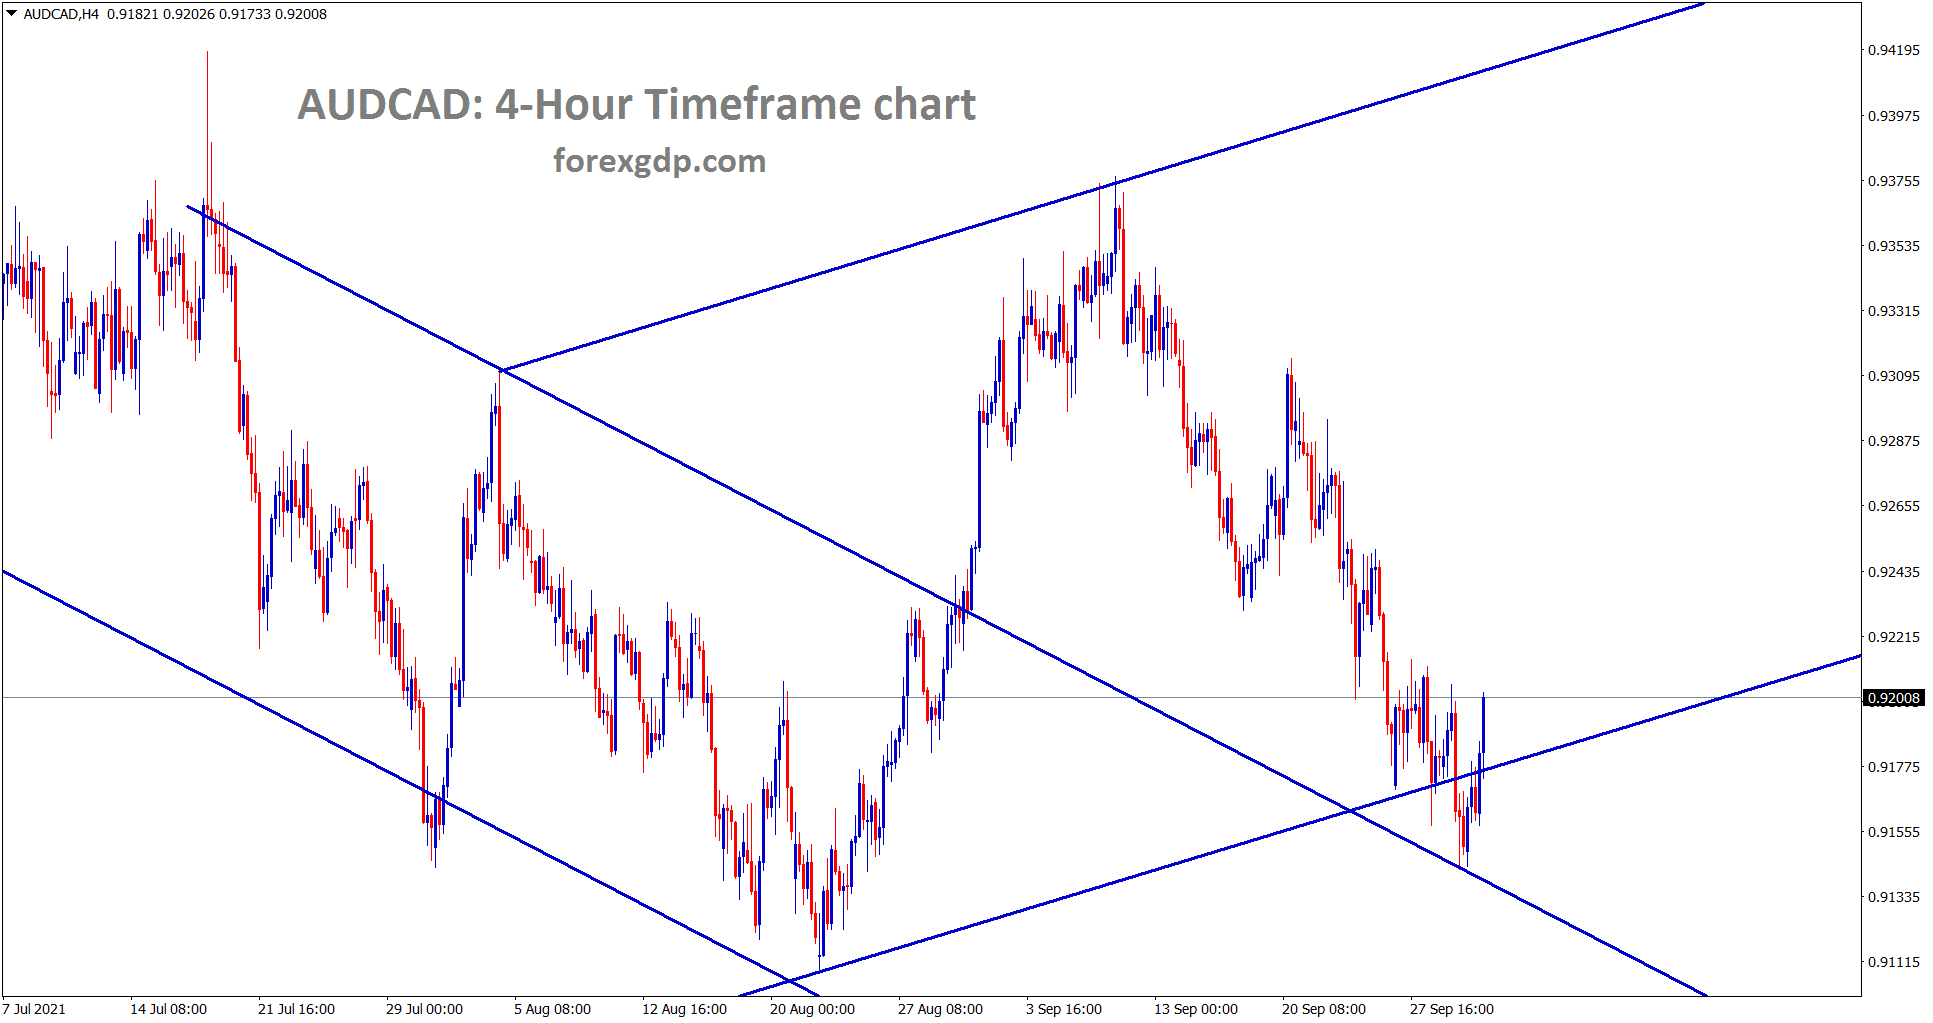 AUDCAD is rebounding after retesting the previous broken desending channel line.